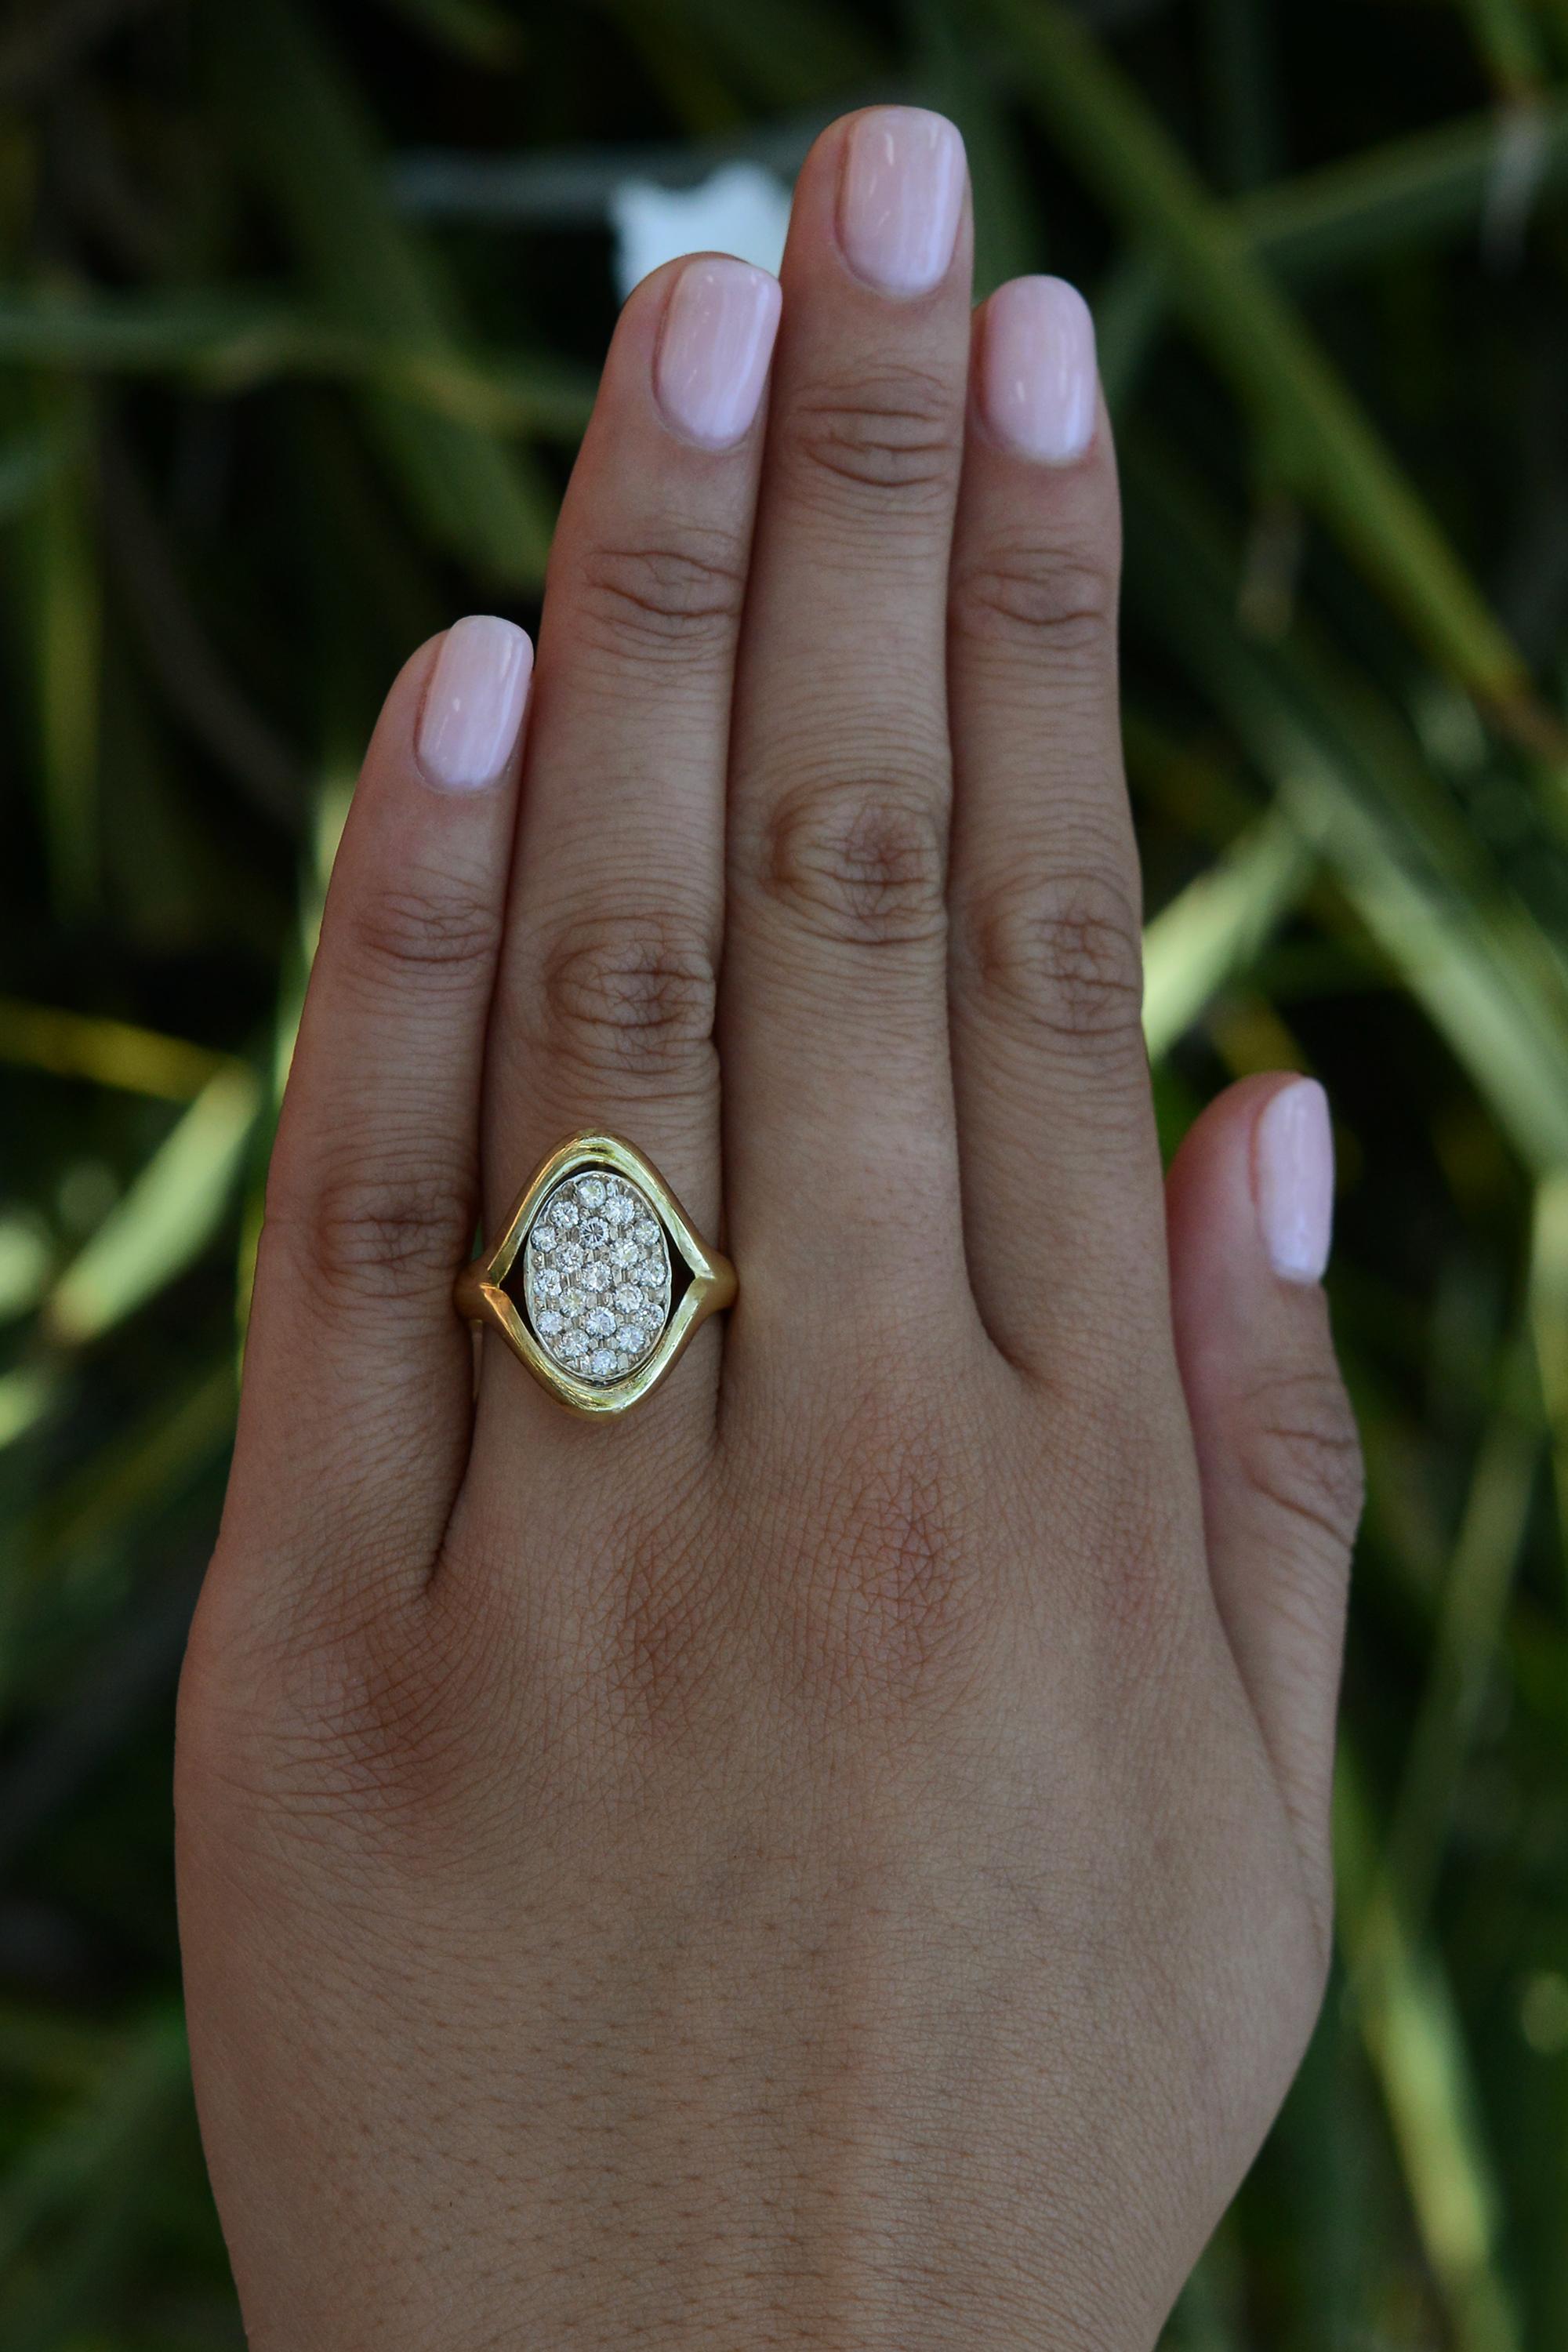 A cocktail ring is the perfect accessory for those who love vintage 1980s disco indulgence. This statement piece is crafted with a shimmering pavé setting with 3/4 carat of brilliant diamonds, set within an 18 karat yellow gold saddle setting. This